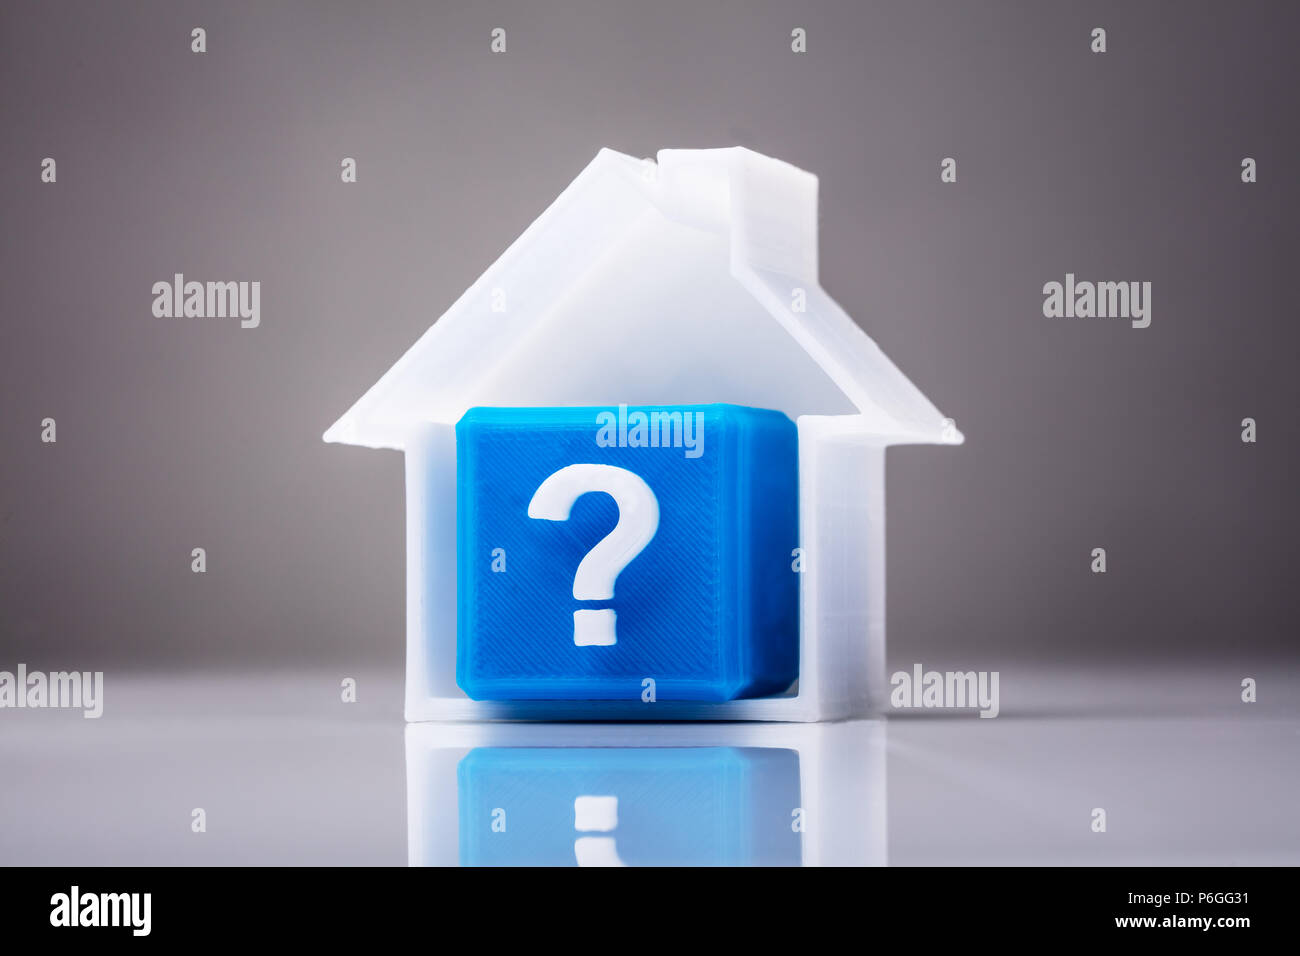 Blue Cube With Question Mark Sign Inside House Model On Reflective Background Stock Photo